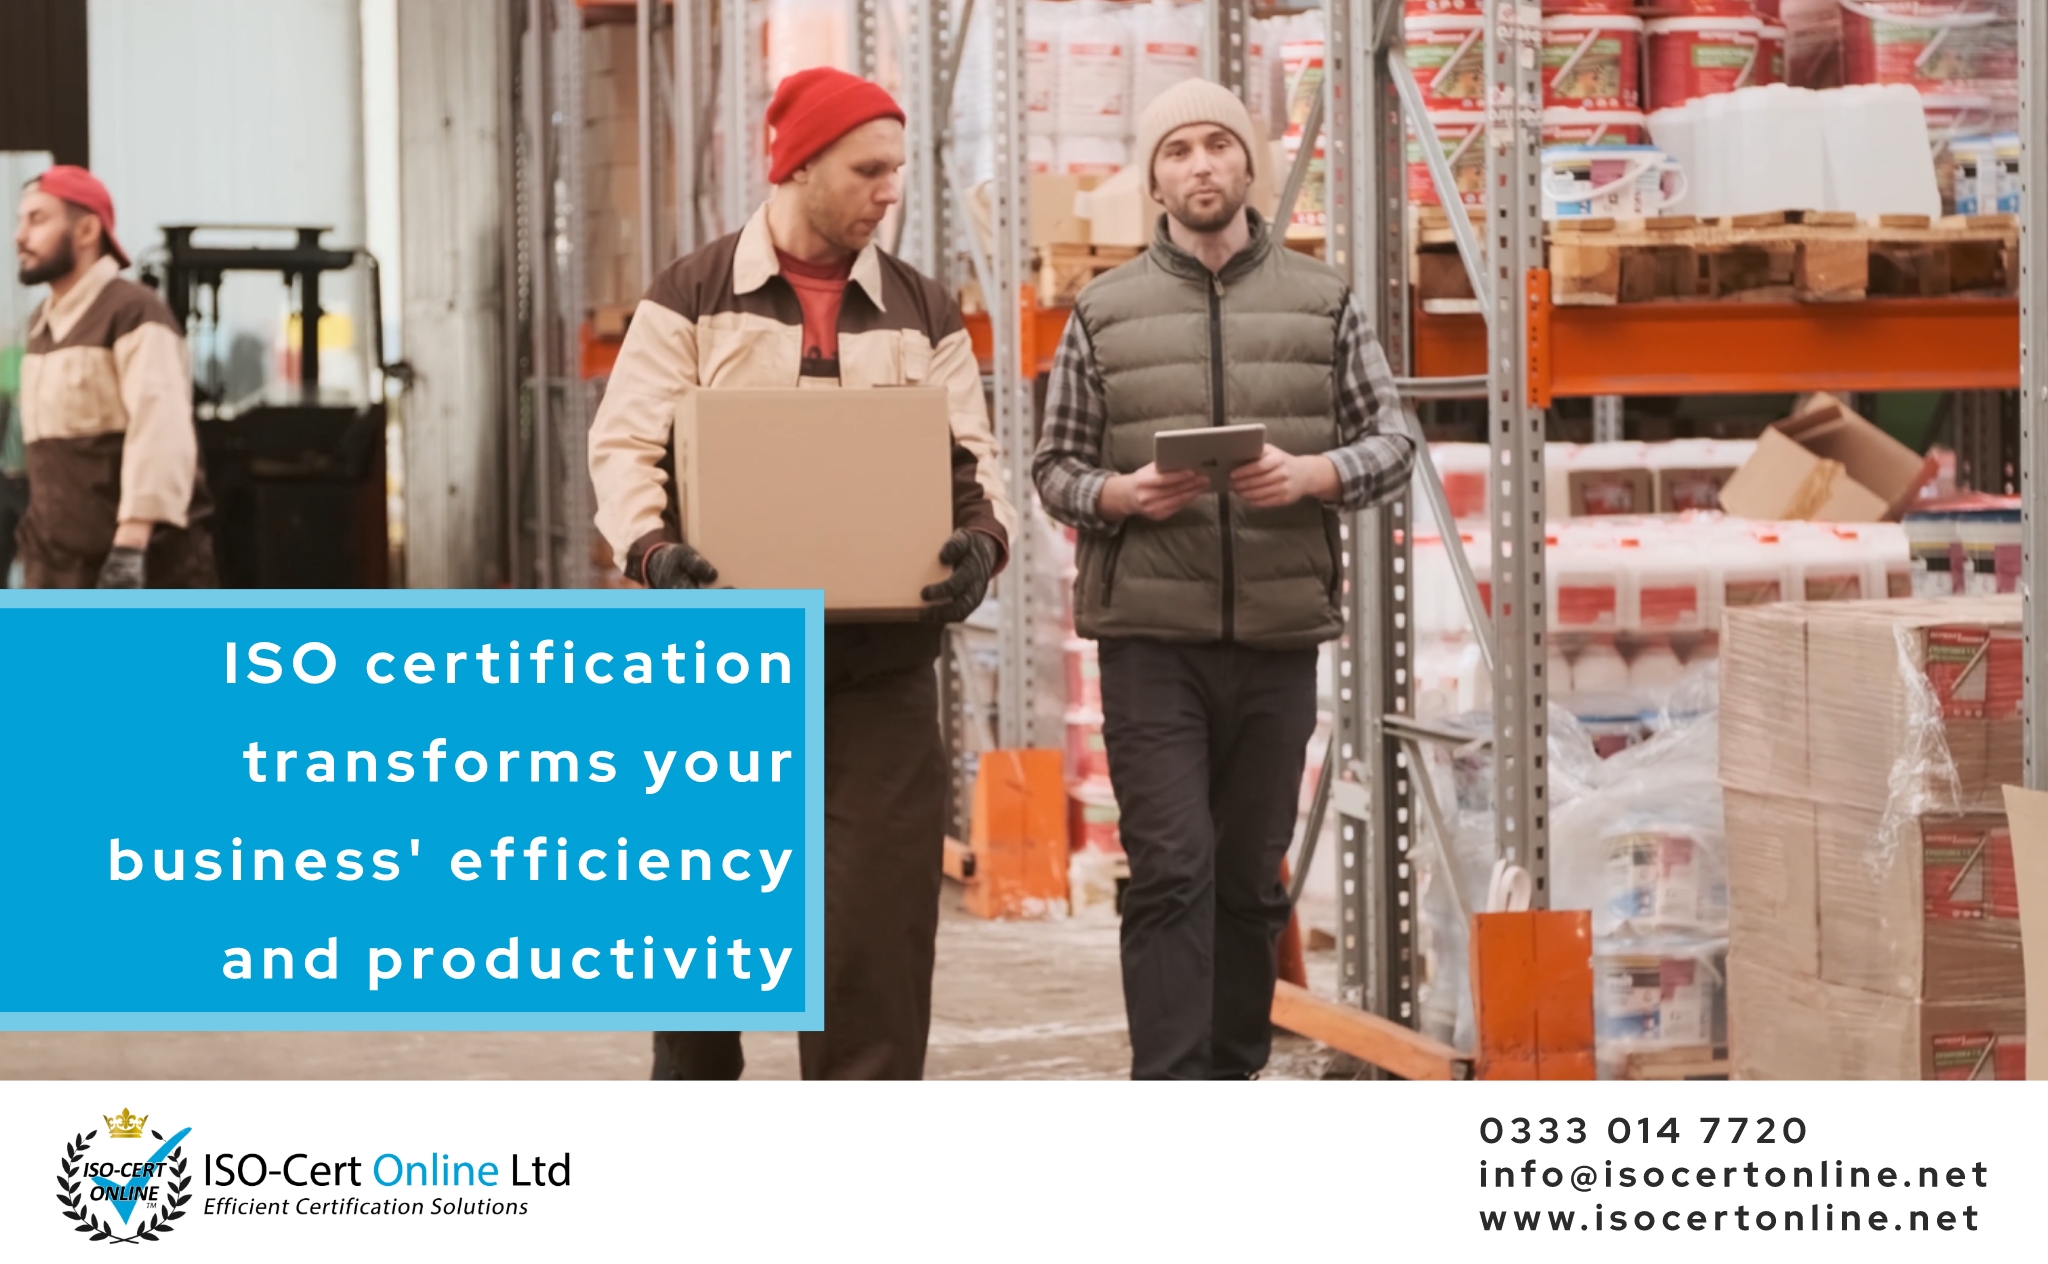 ISO certification transforms your business